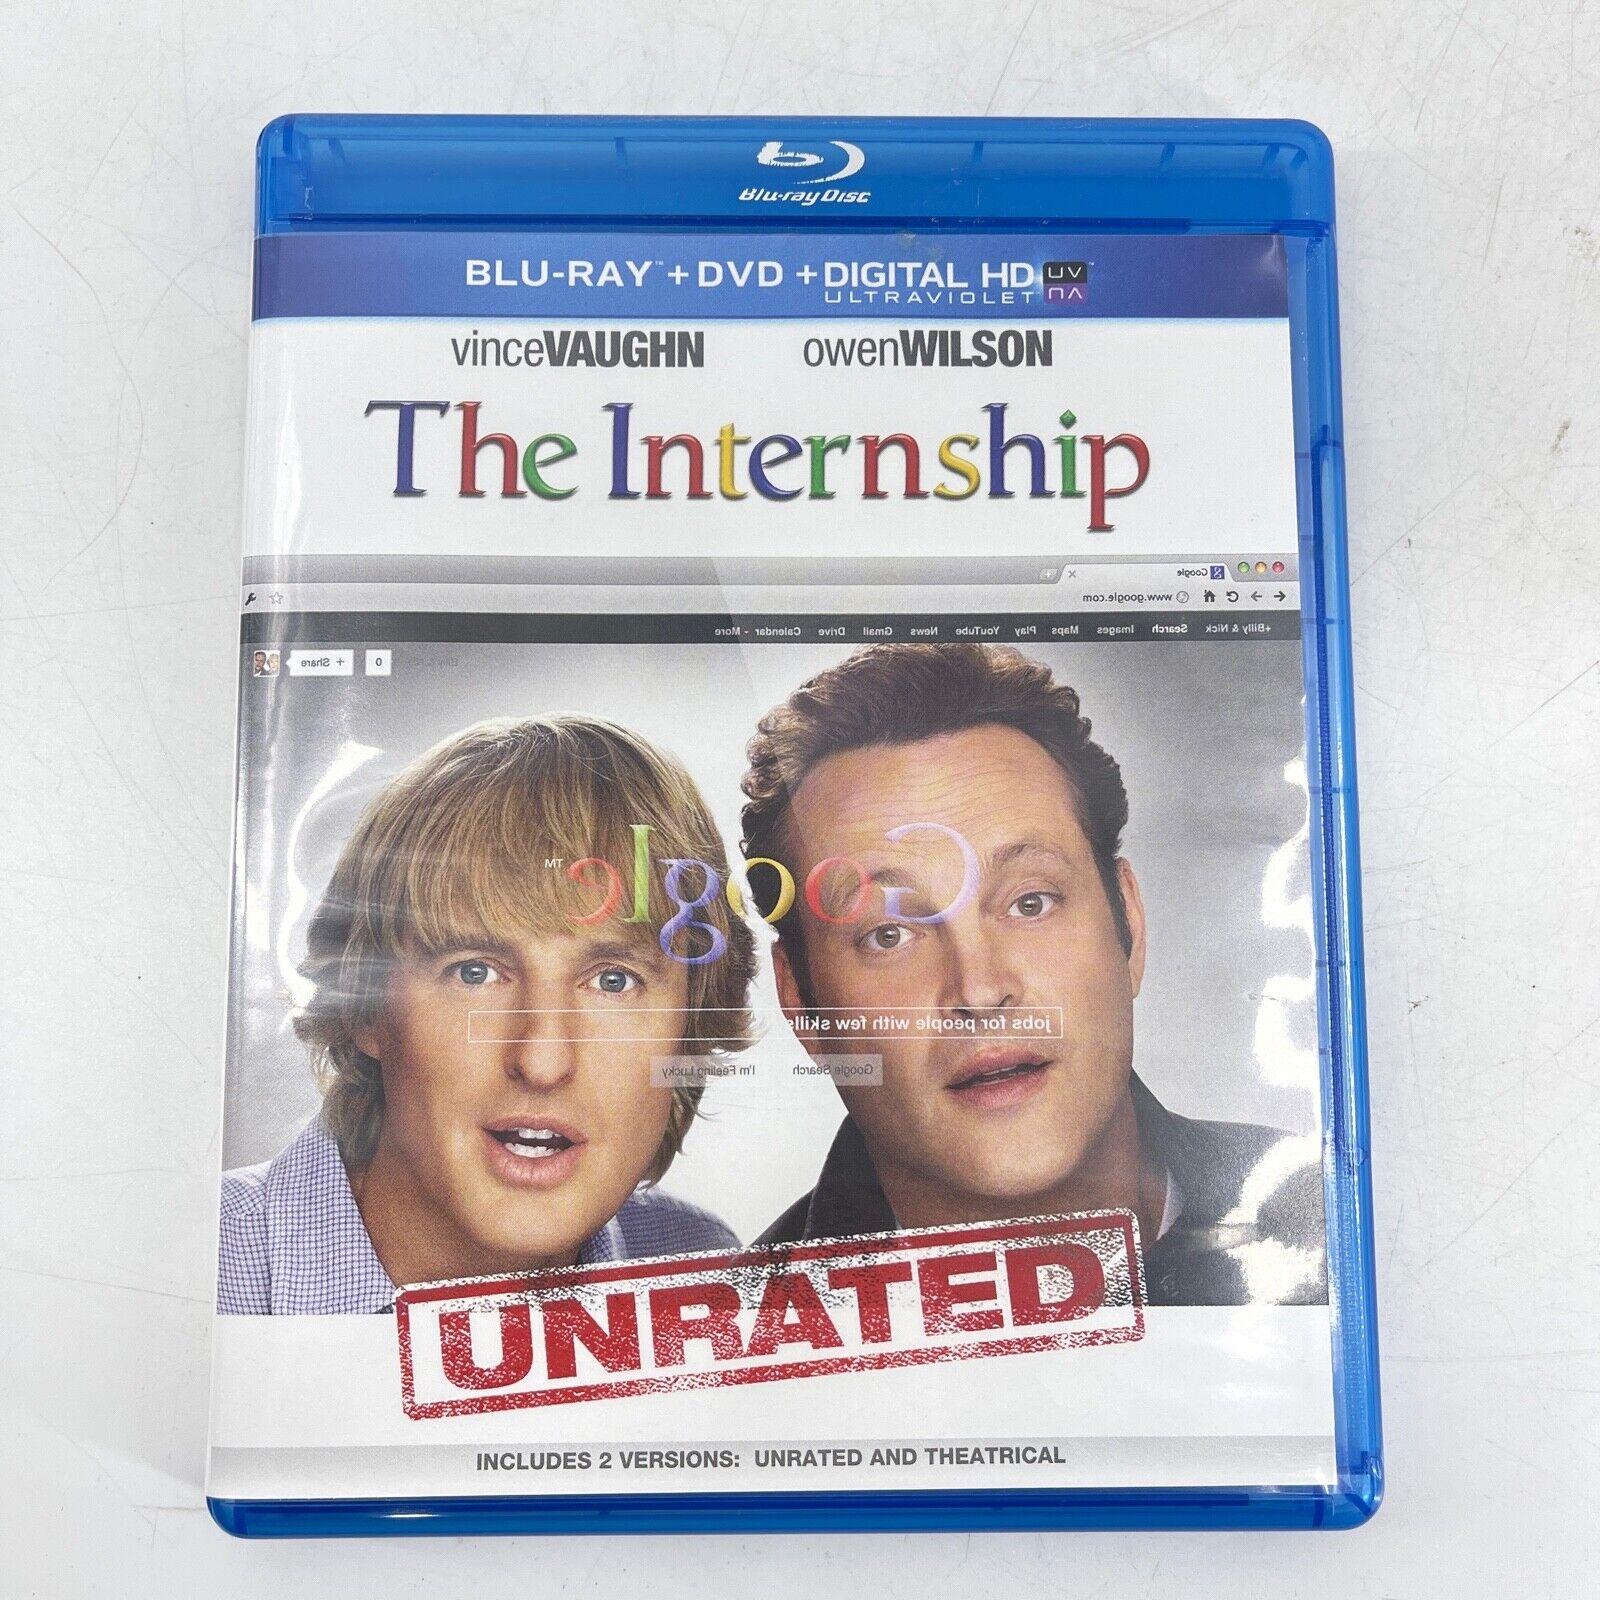 The Internship - Theatrical & Unrated Versions (Blu-Ray + DVD)